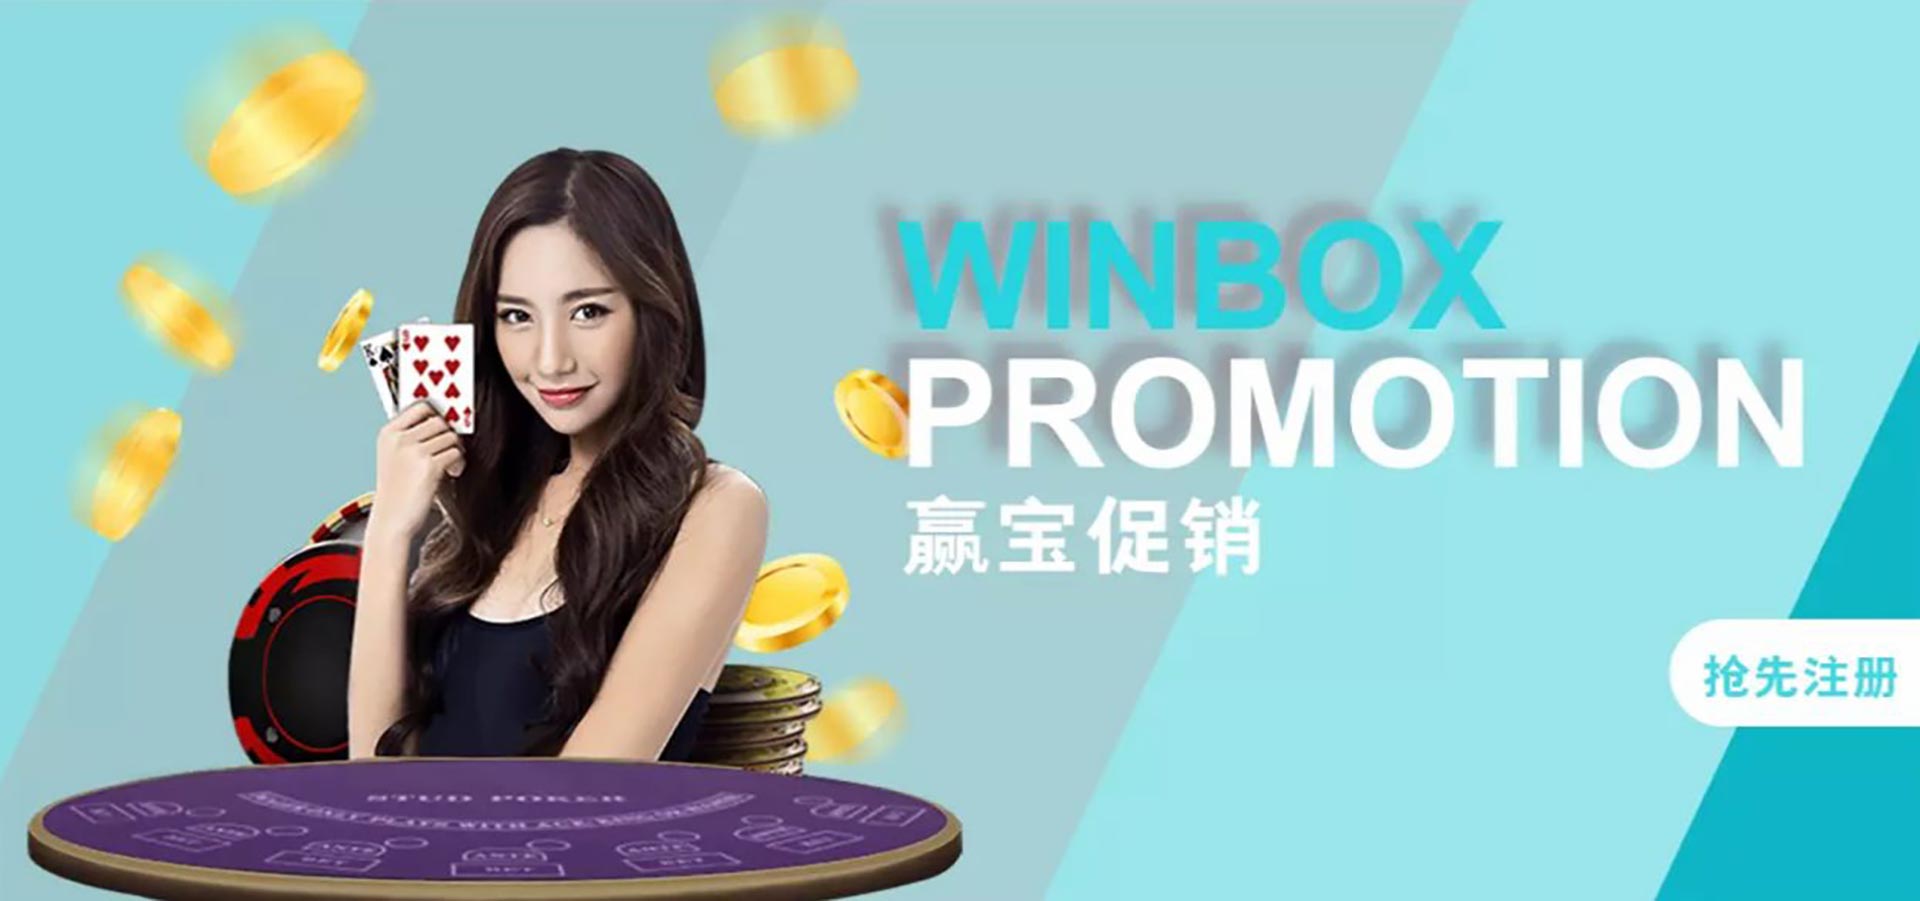 Winbox-Promotion-Banner